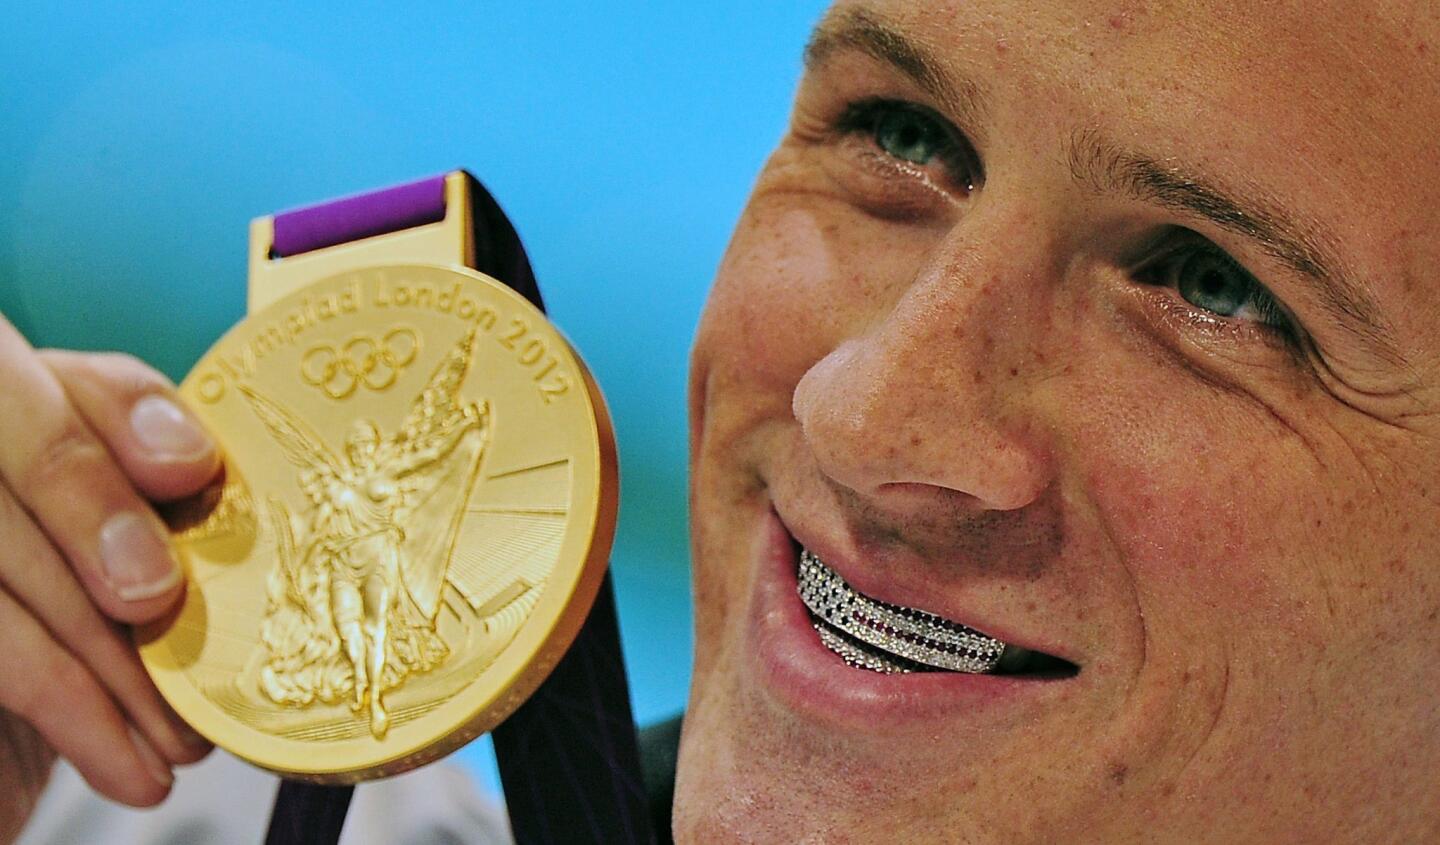 When American swimmer and fashion lover Ryan Lochte won his first gold medal, he stepped up to the podium and gave a big grin -- revealing a custom made jewel-encrusted American flag dental grill. The United States looked on, embarrassed. Lochte bared more than that when he was photographed on Vogue's June cover running arm in arm on a beach with fellow Olympians Serena Williams and Hope Solo, all clad in tasteful bathing suits. (June, July)